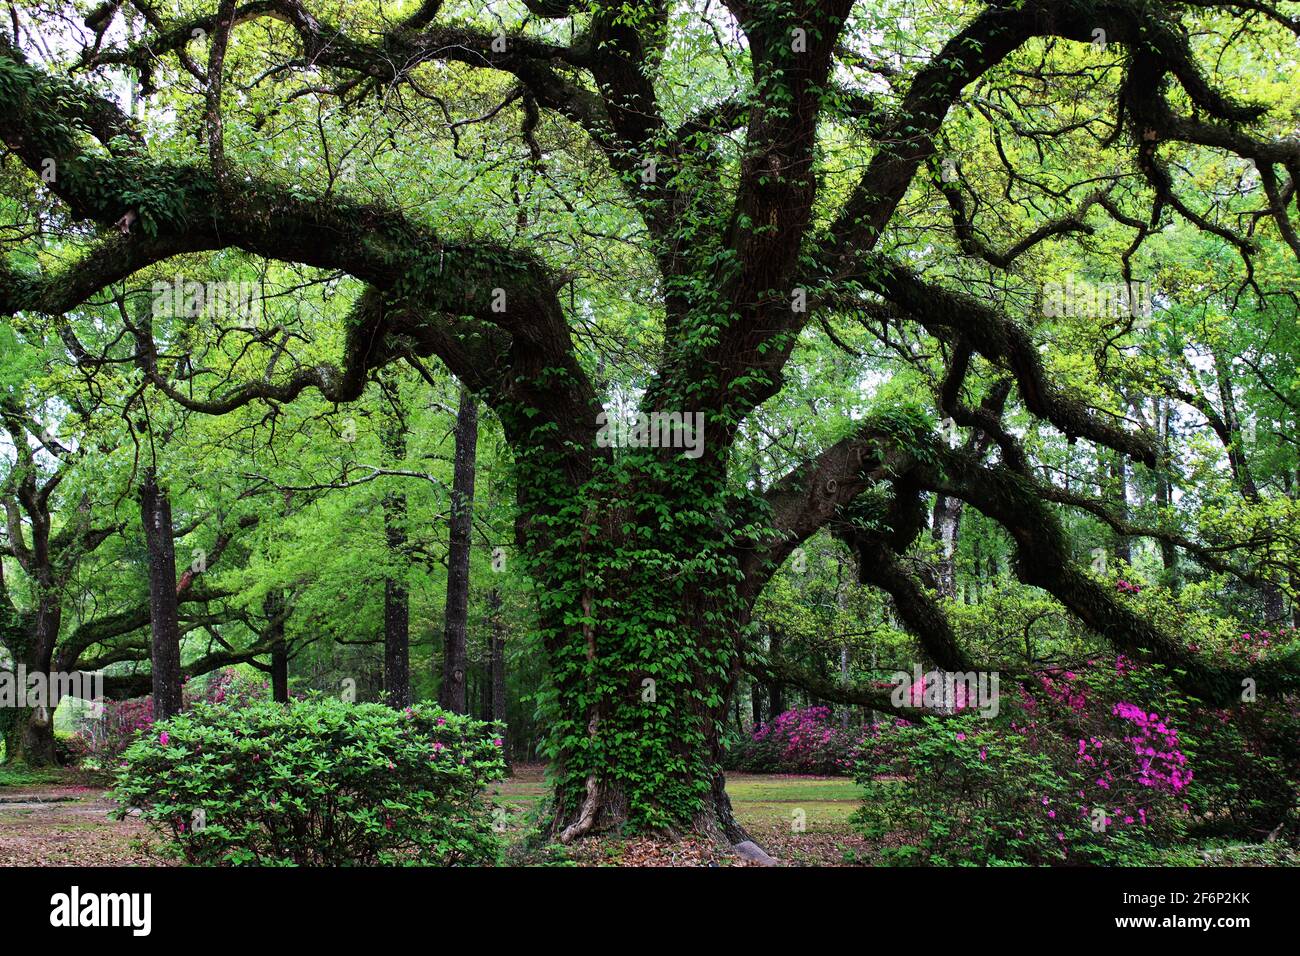 The large branches of this oak tree reach down among the Springtime blooms. Stock Photo